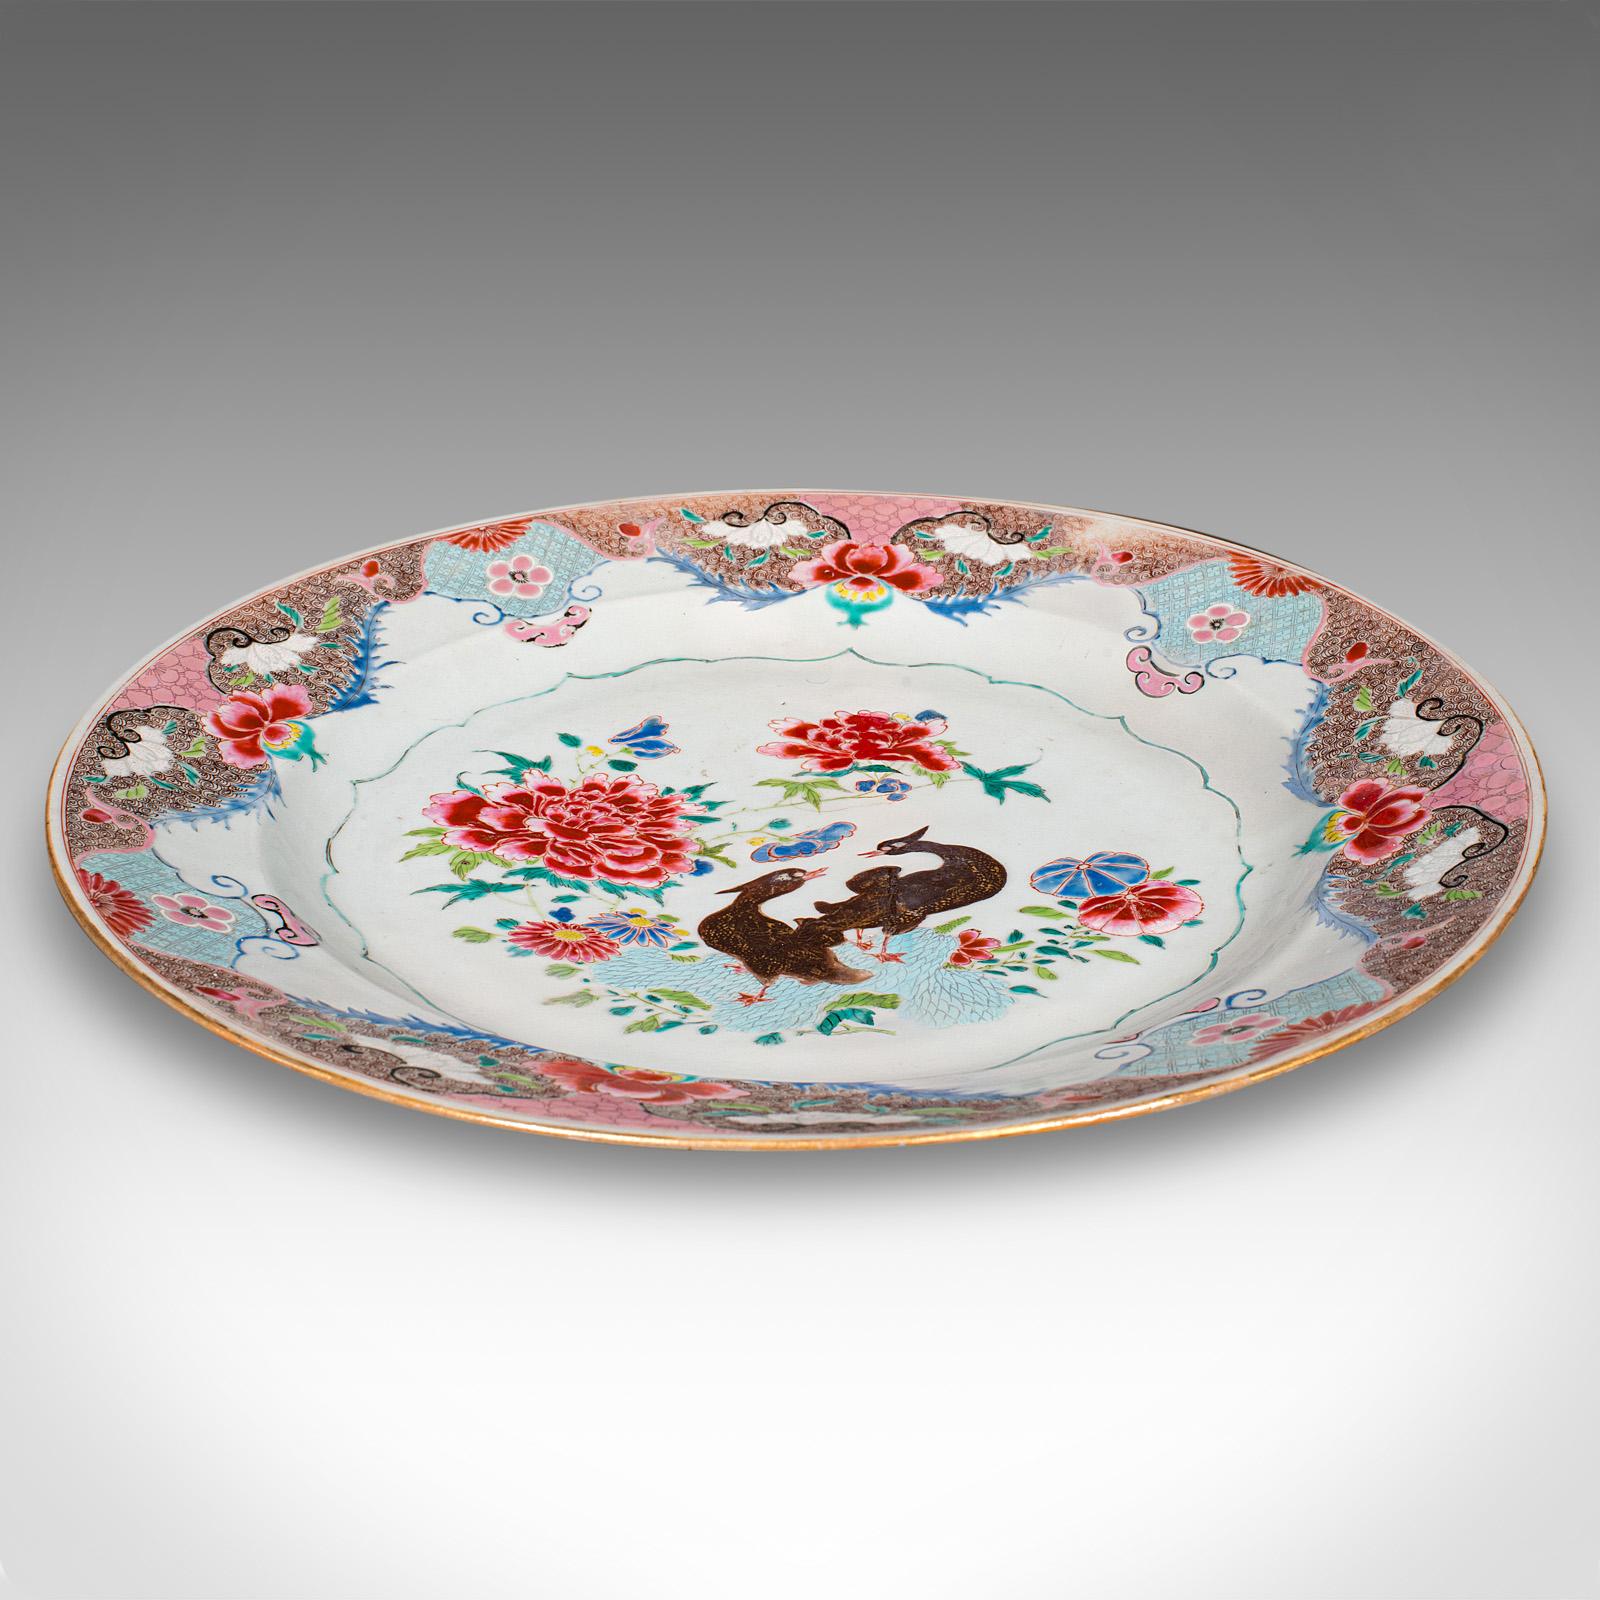 20th Century Large Antique Decorative Charger, Japanese, Ceramic, Serving Plate, Circa 1920 For Sale